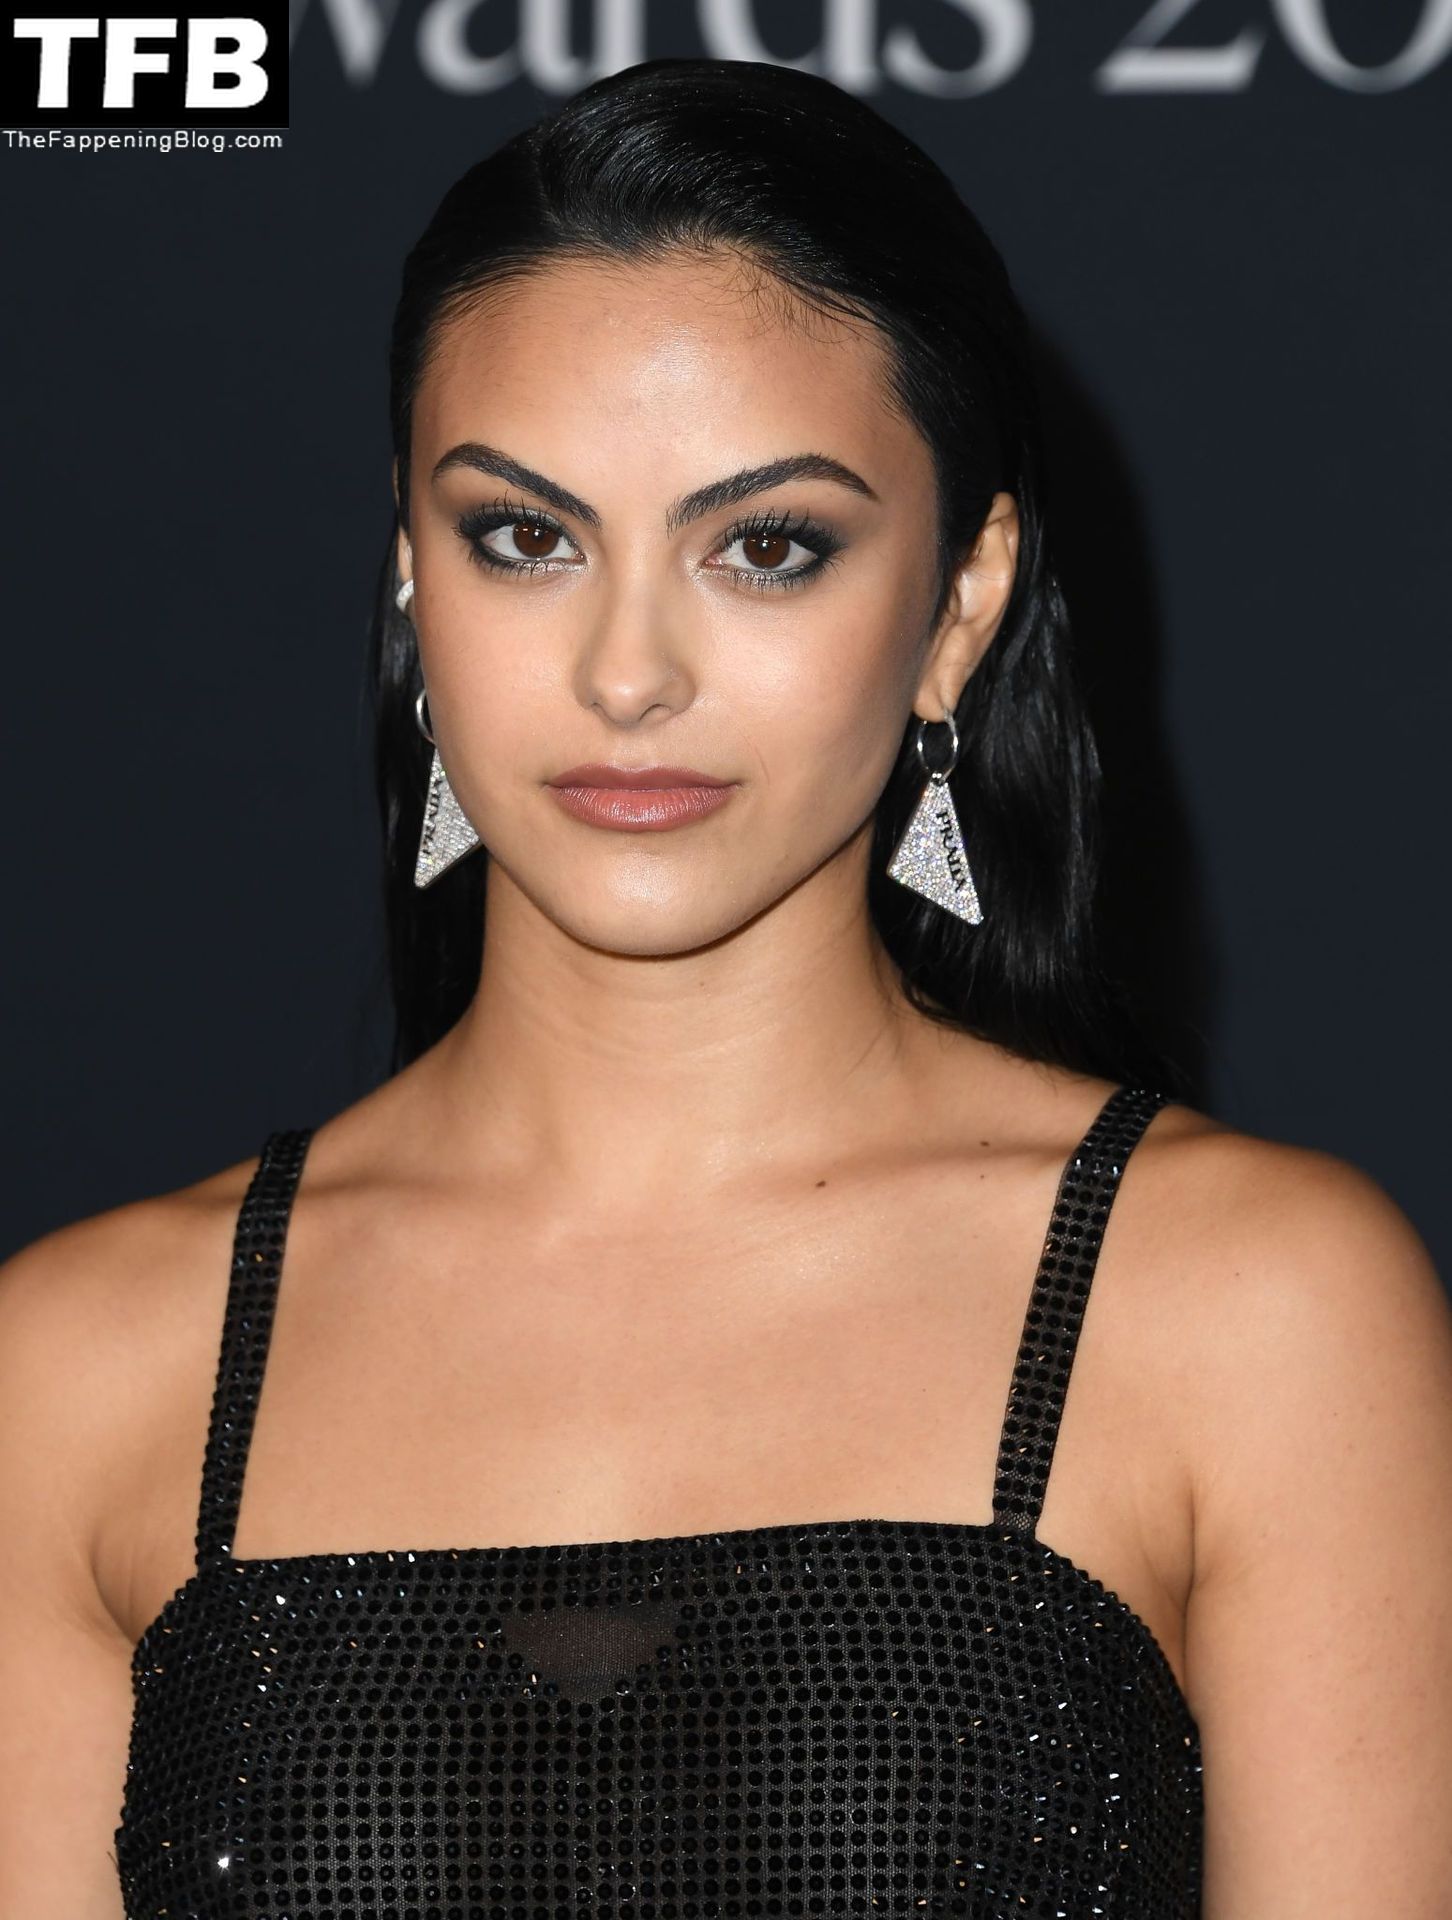 Camila-Mendes-See-Through-Tits-The-Fappening-Blog-41.jpg